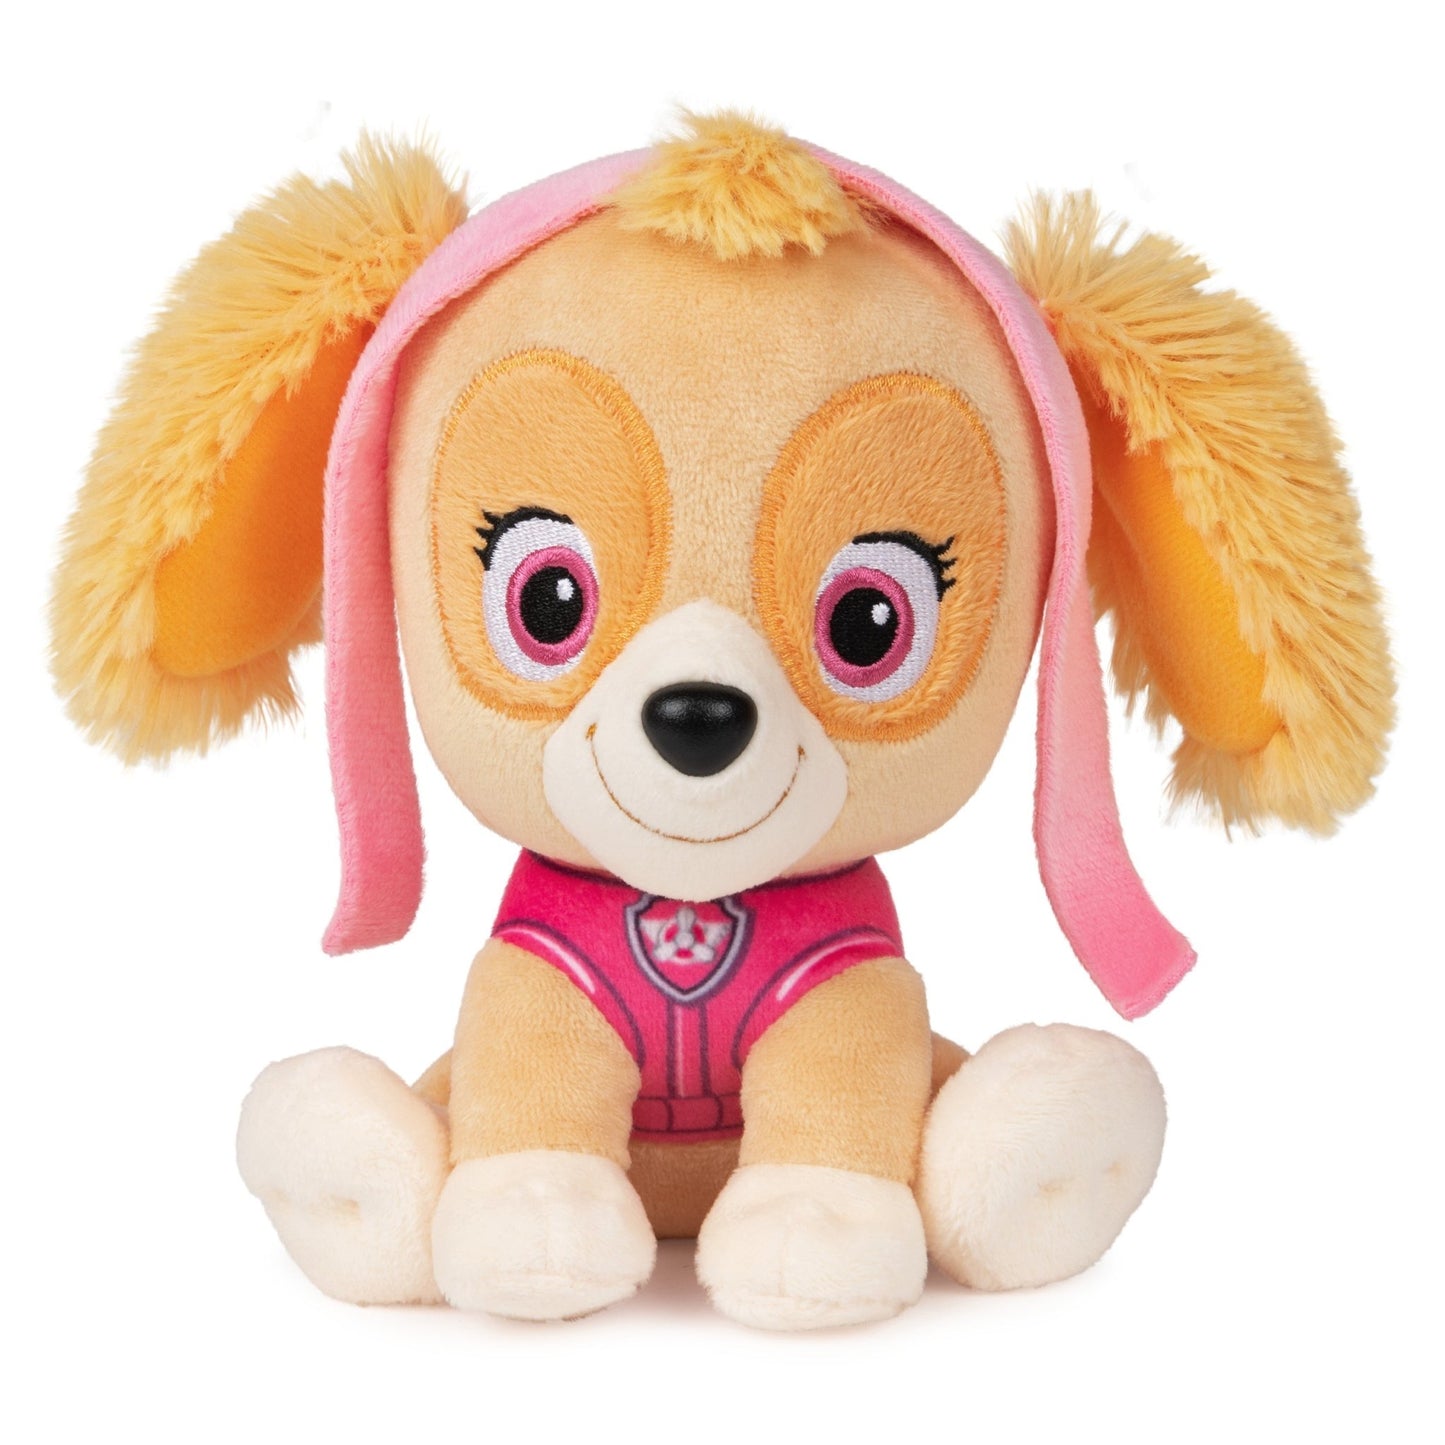 GUND Official PAW Patrol Skye in Signature Aviator Pilot Uniform Plush Toy, Stuffed Animal for Ages 1 and Up, 6" - Paramount Shop